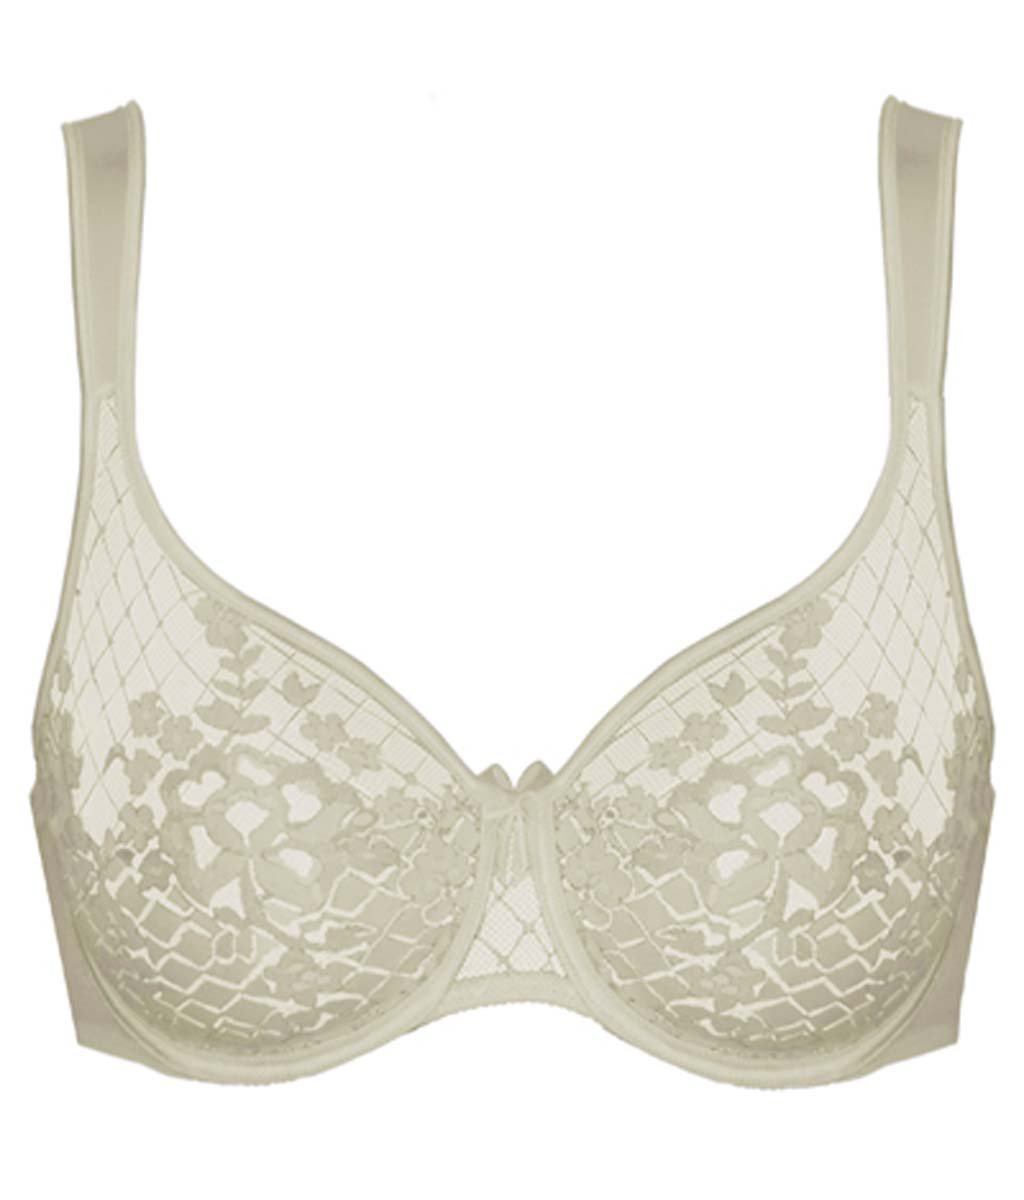 Empreinte 'Melody' (Perle) Seamless Full Cup Bra - Sandra Dee - Product Shot - Front